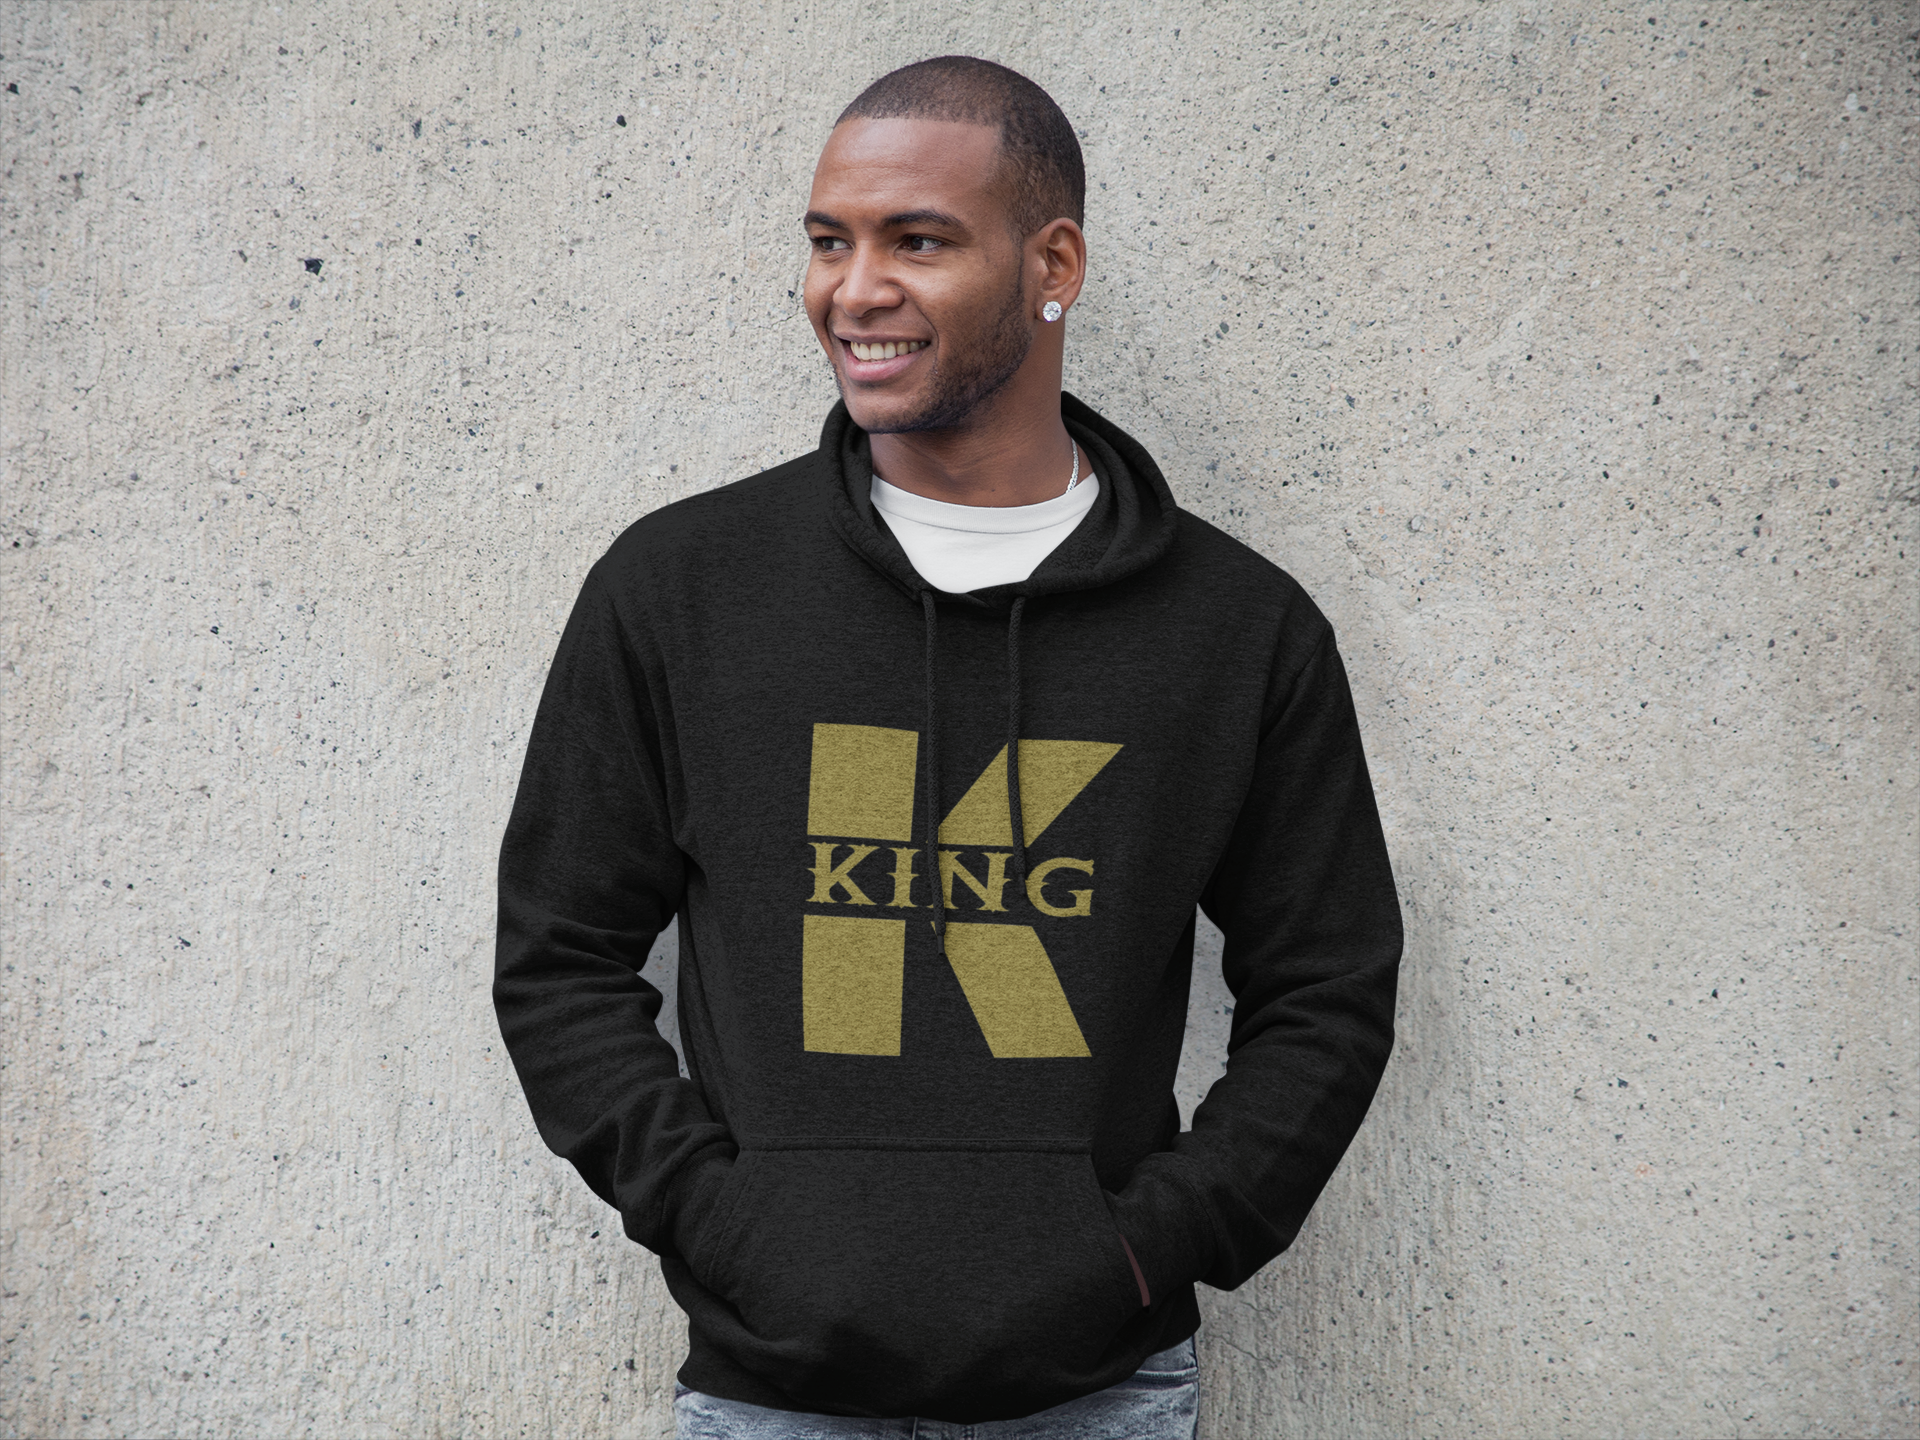 A man wearing a black and gold hoodie.